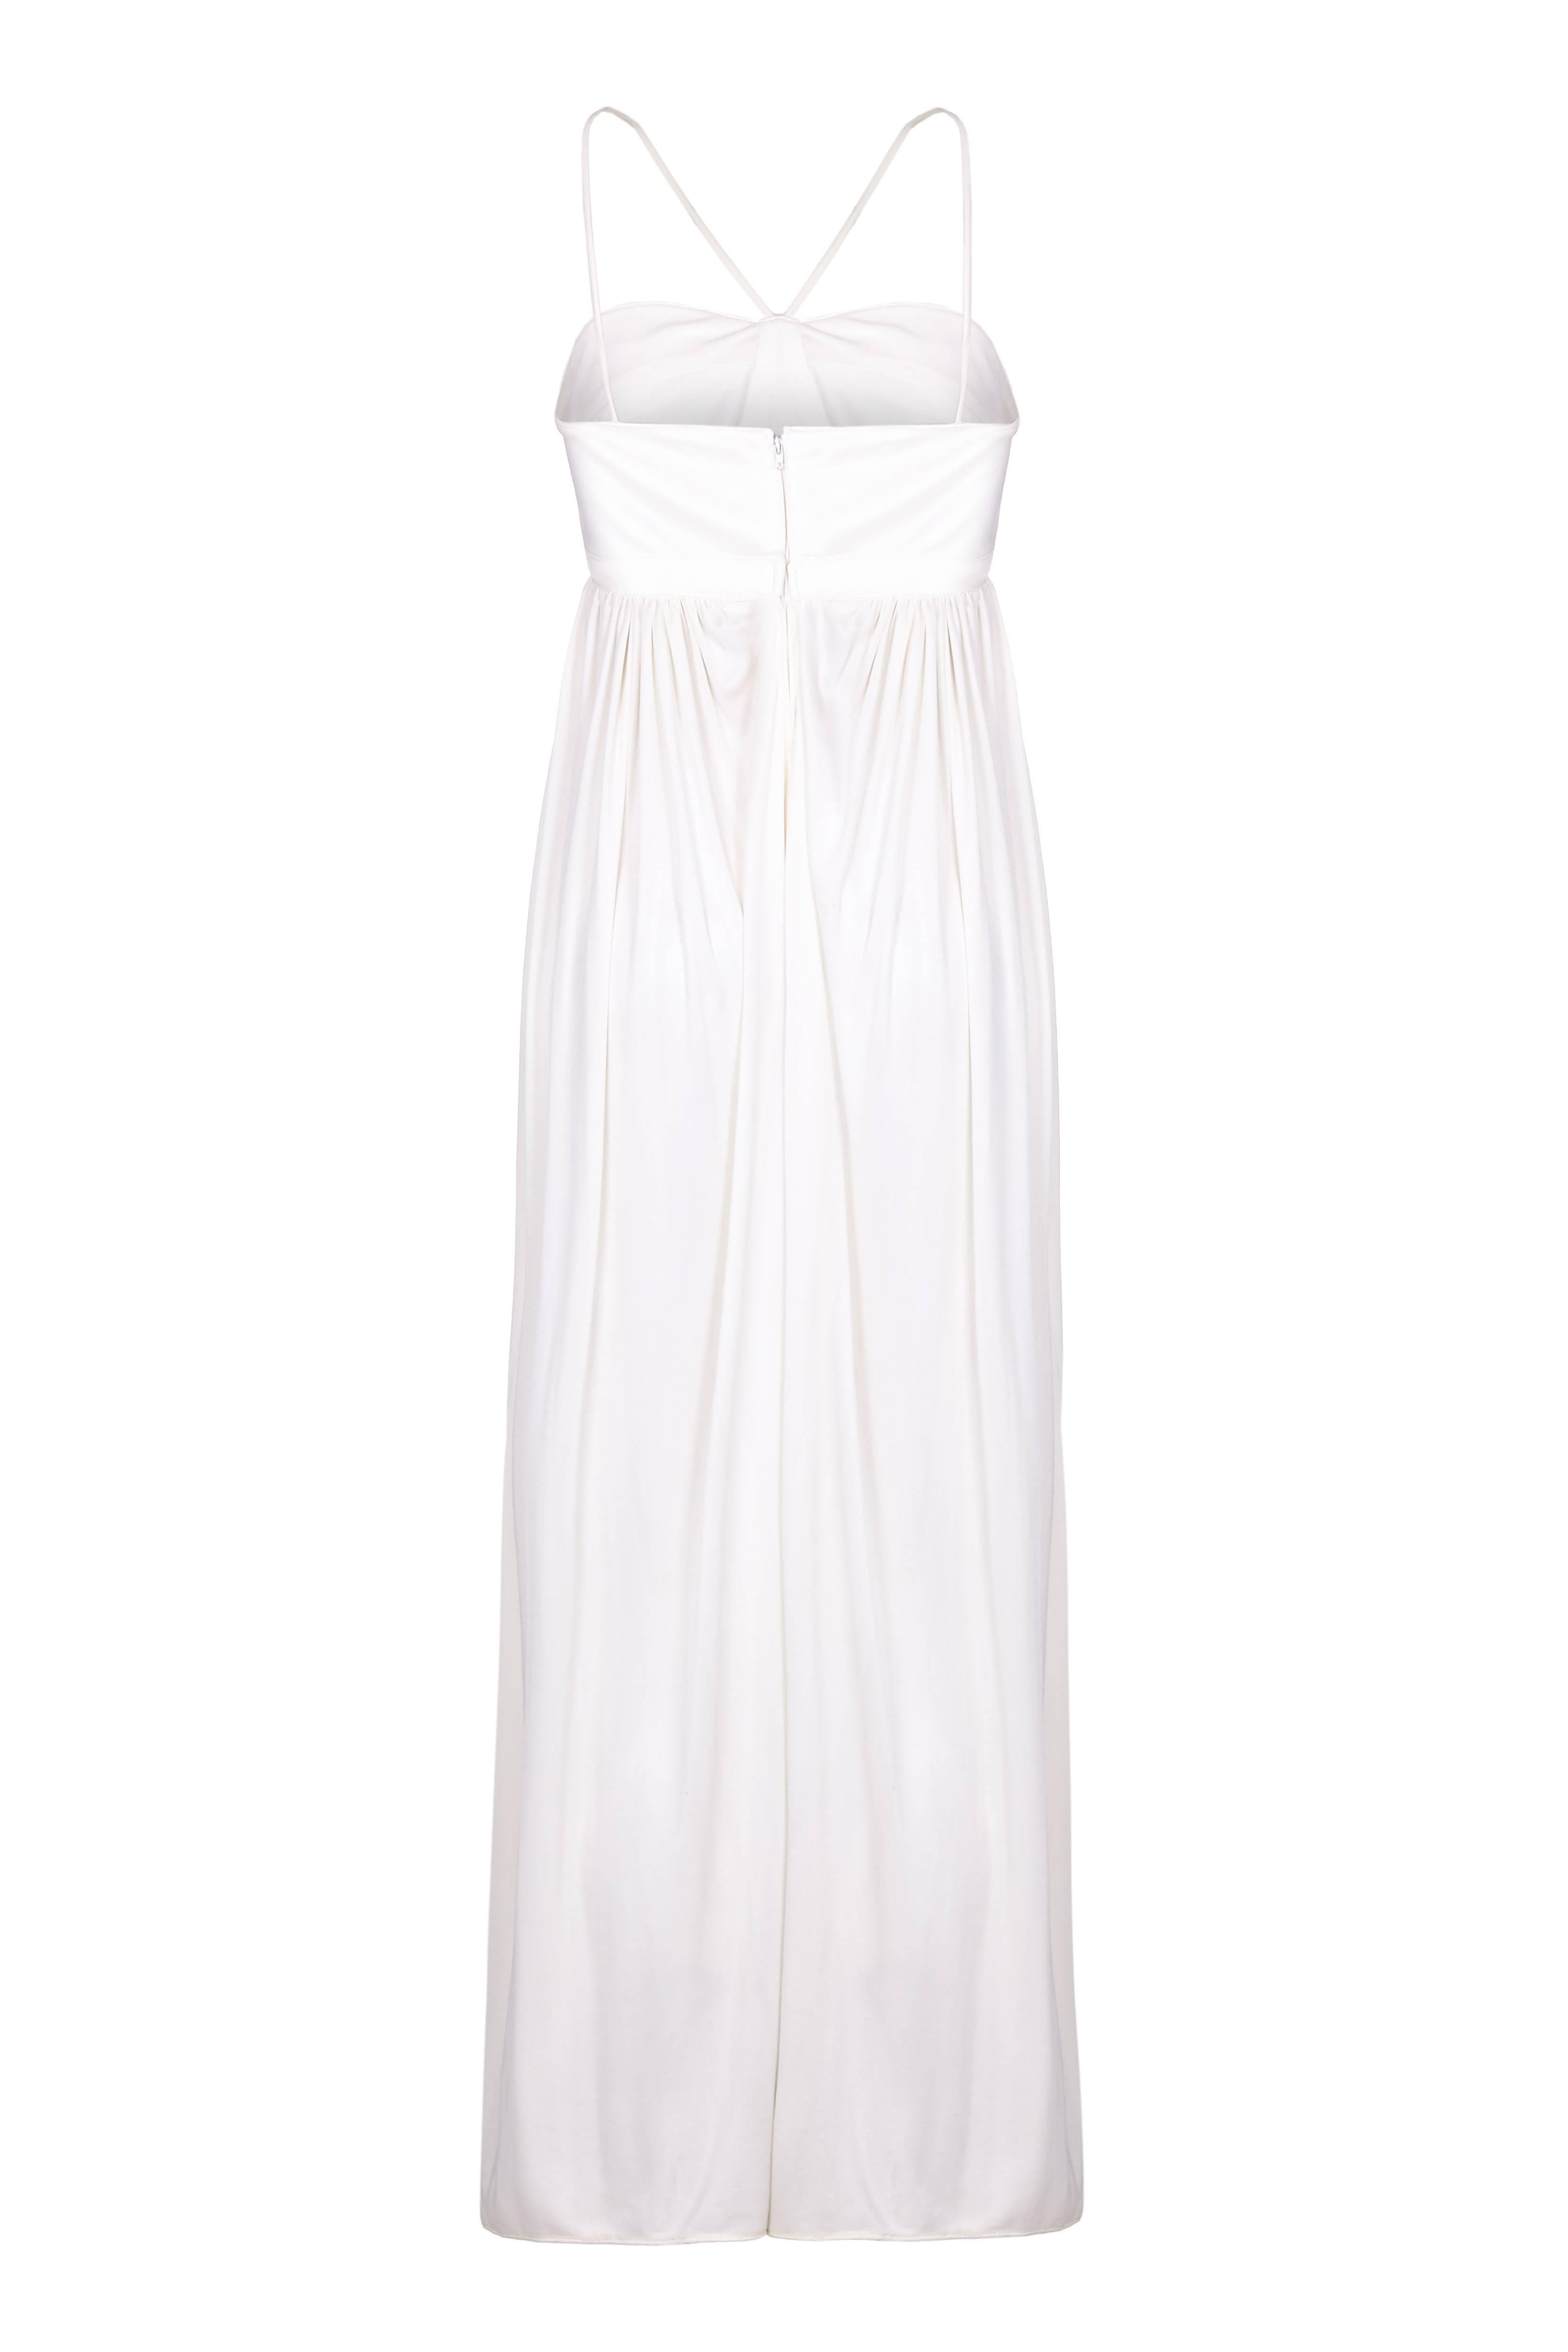 This enchanting vintage 1970s Bill Gibb silk jersey evening dress in soft white is in beautiful vintage condition and as the designer notoriously only made limited numbers of the same design, this is without doubt a rare piece (the original owner